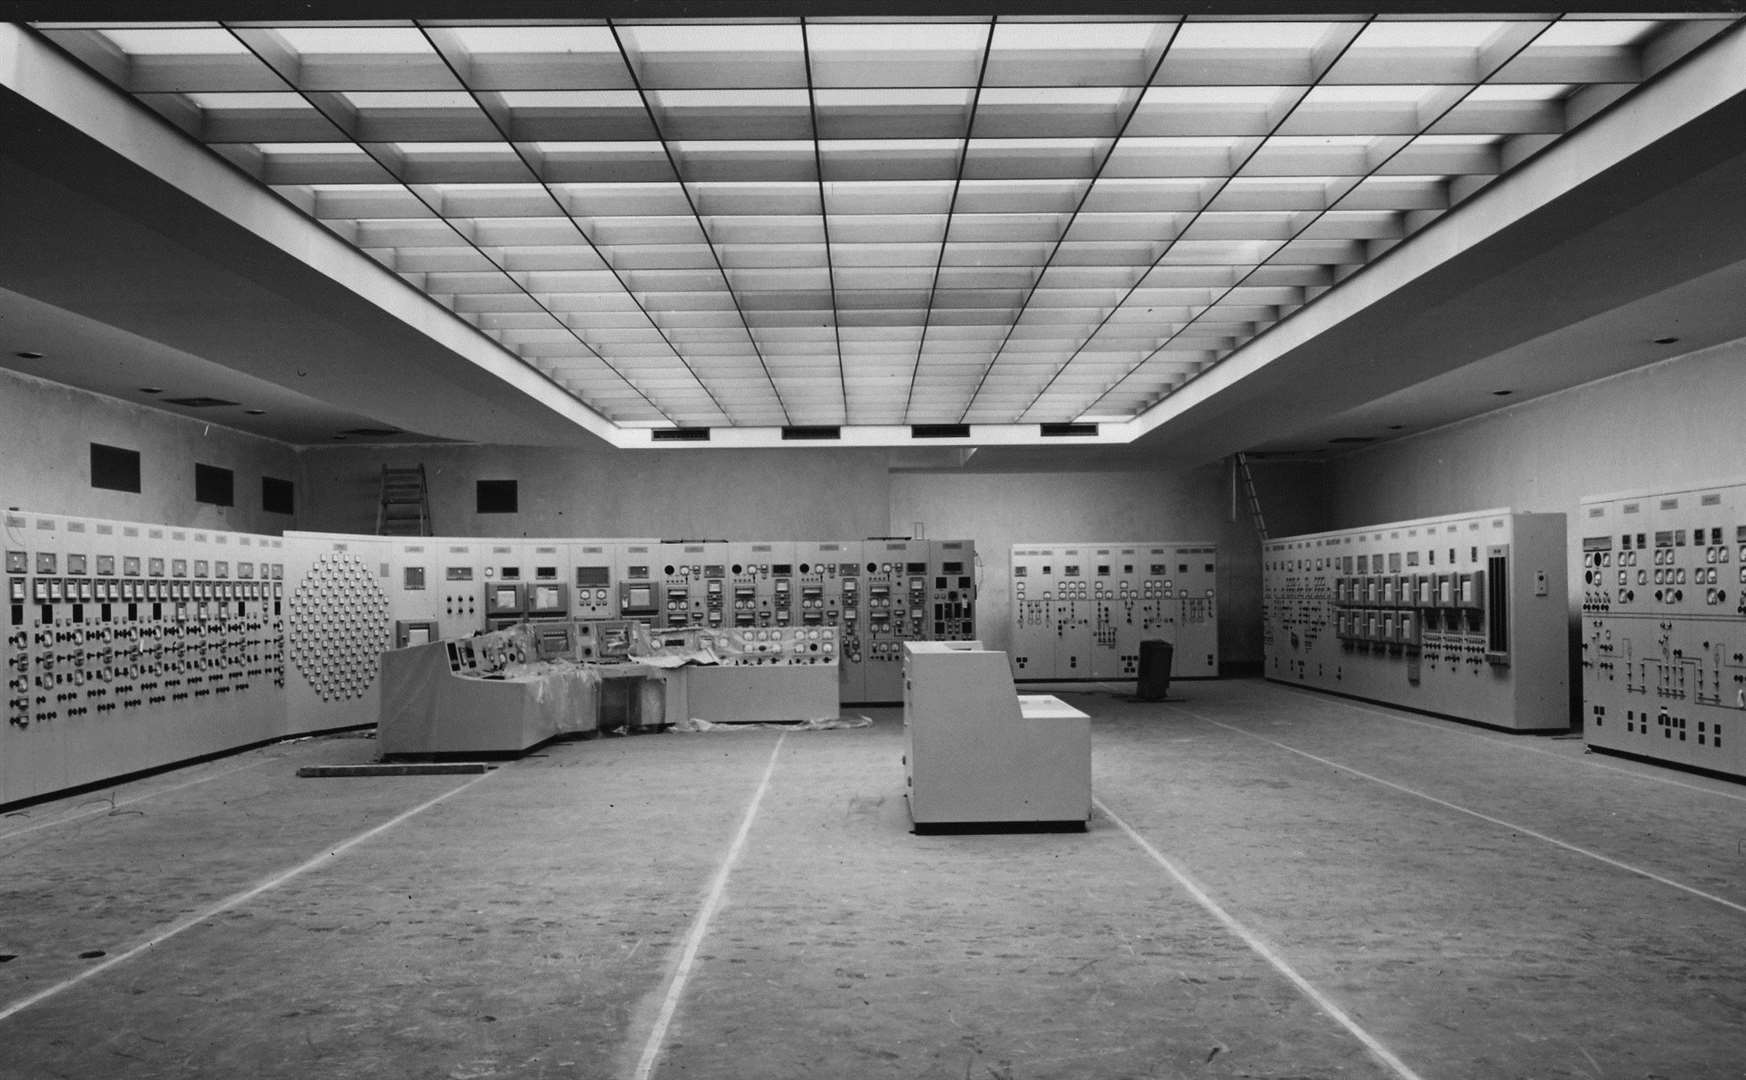 The central control room at Dungeness A nuclear power station in 1964